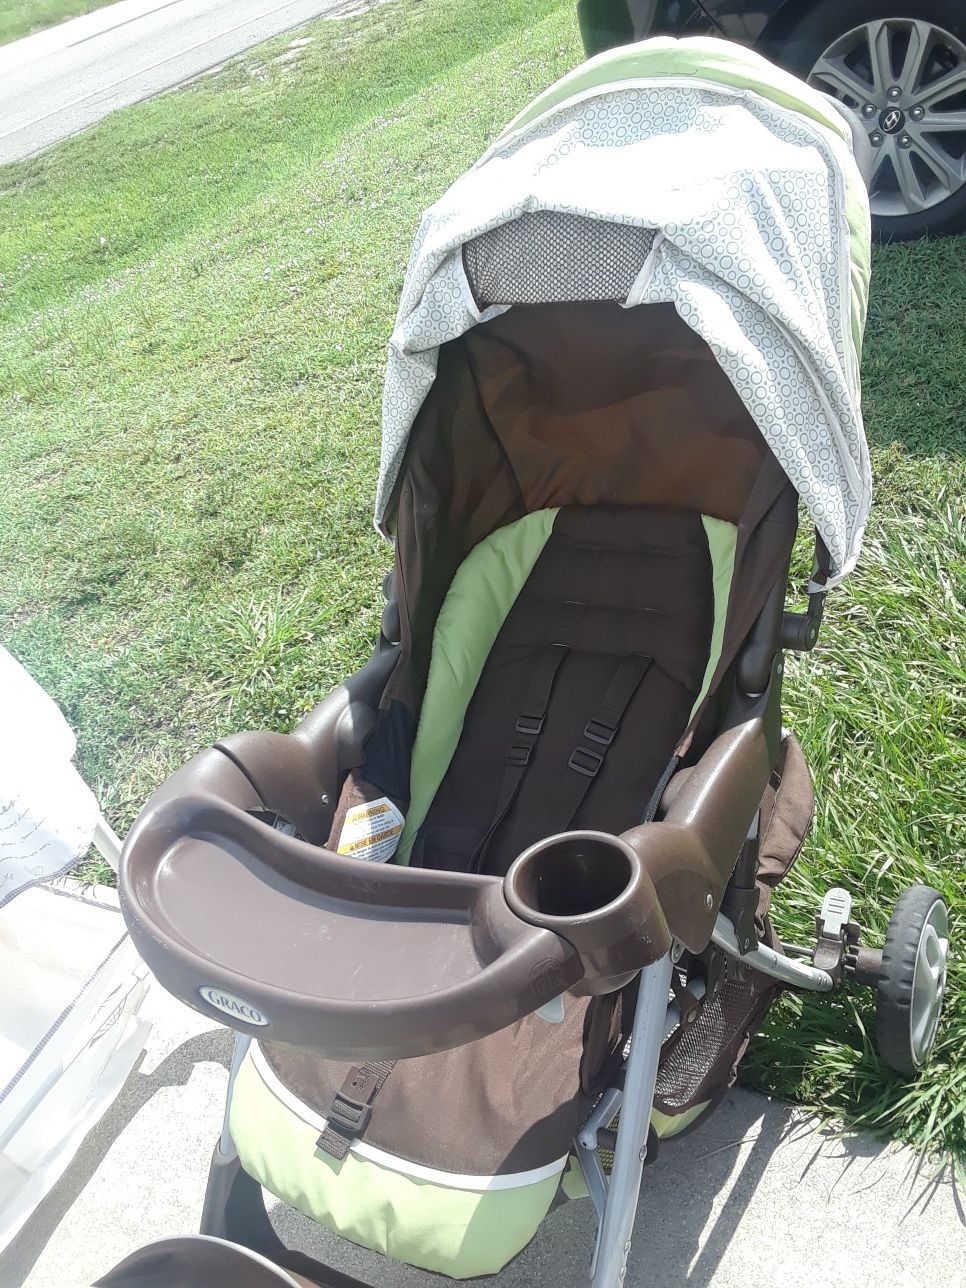 stroller with car seat comes as a set in good condition expires in 2026.